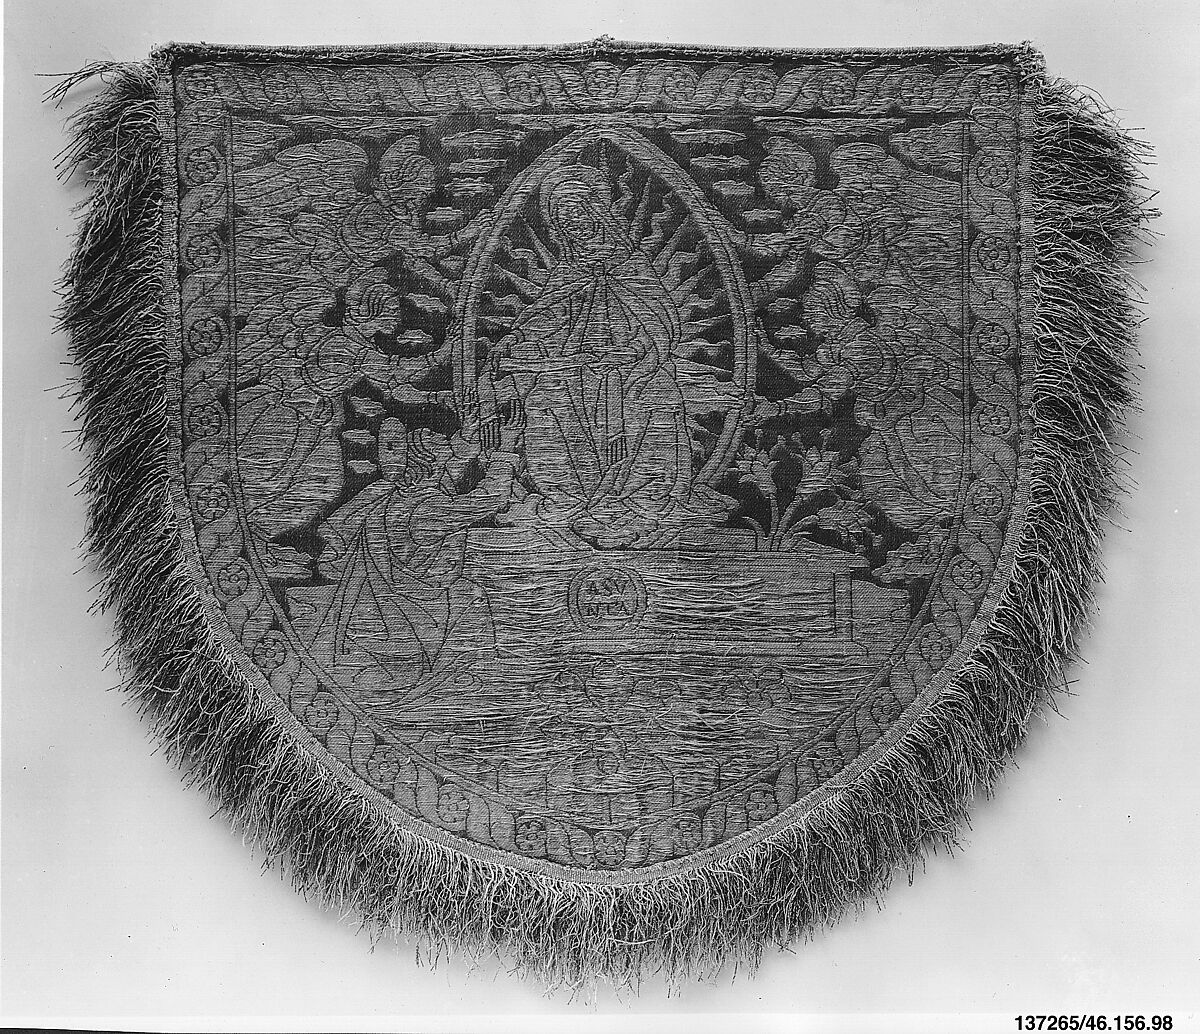 Hood for a cope, Silk, linen and metal thread, Italian, Florence 